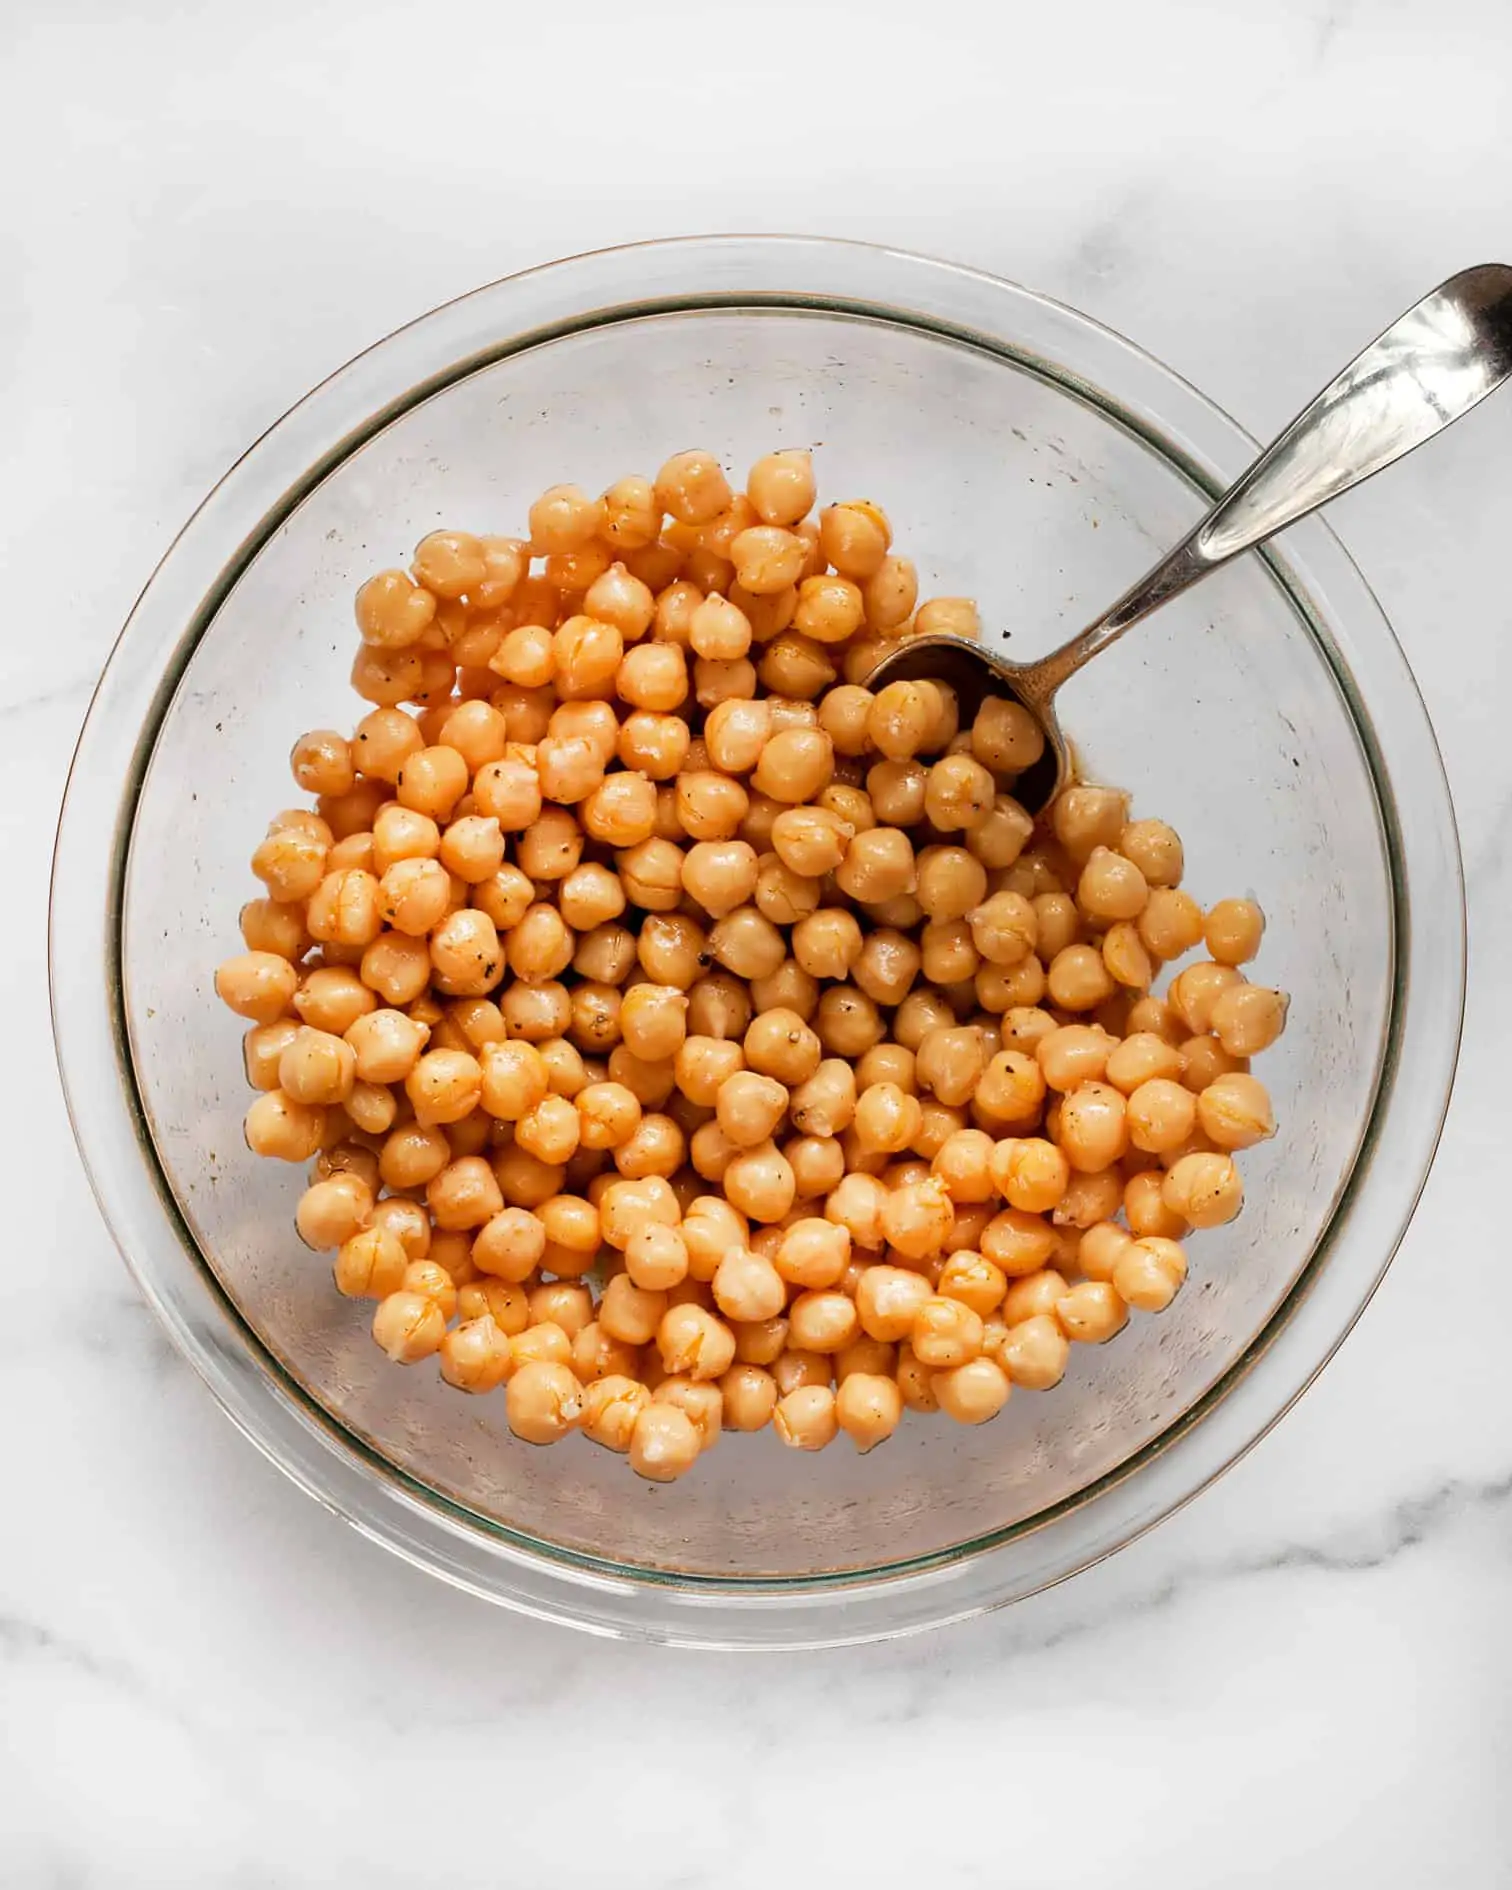 Stir the chickpeas into the marinade into the bowl